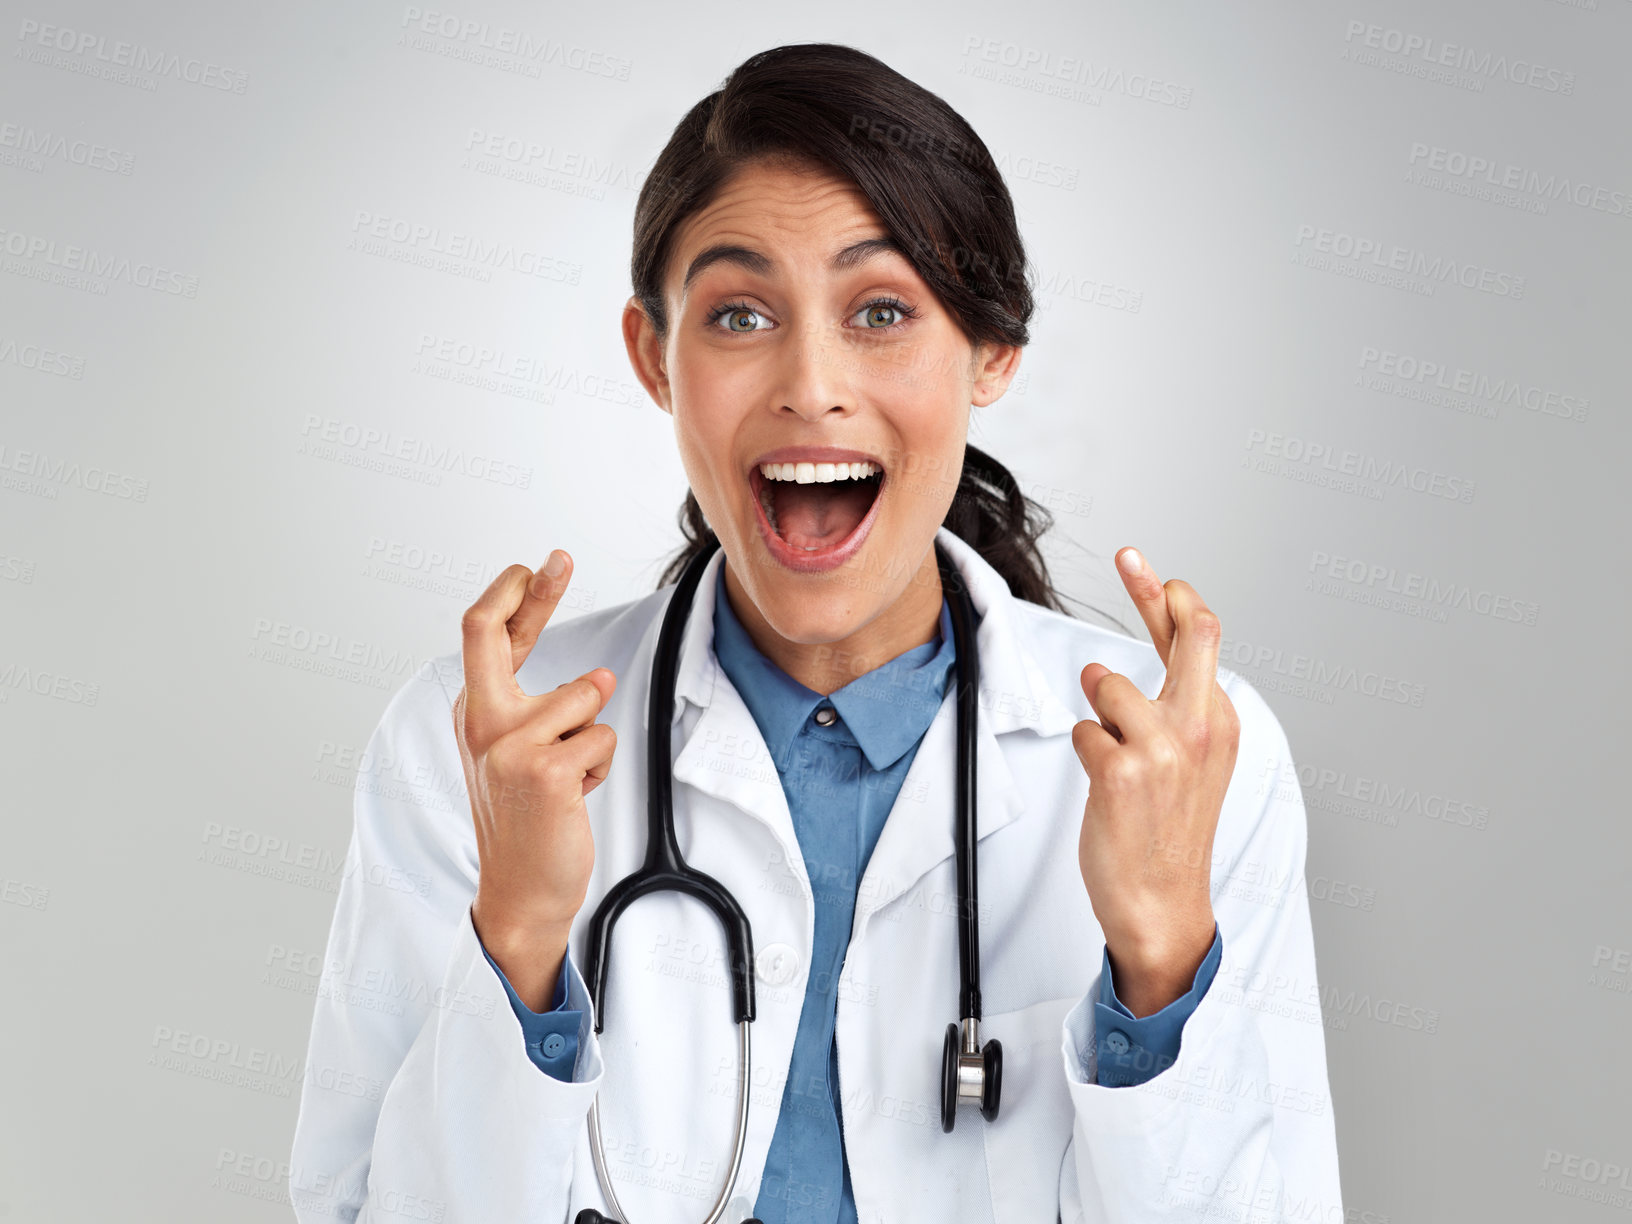 Buy stock photo Studio portrait of a young doctor crossing her fingers against a grey background